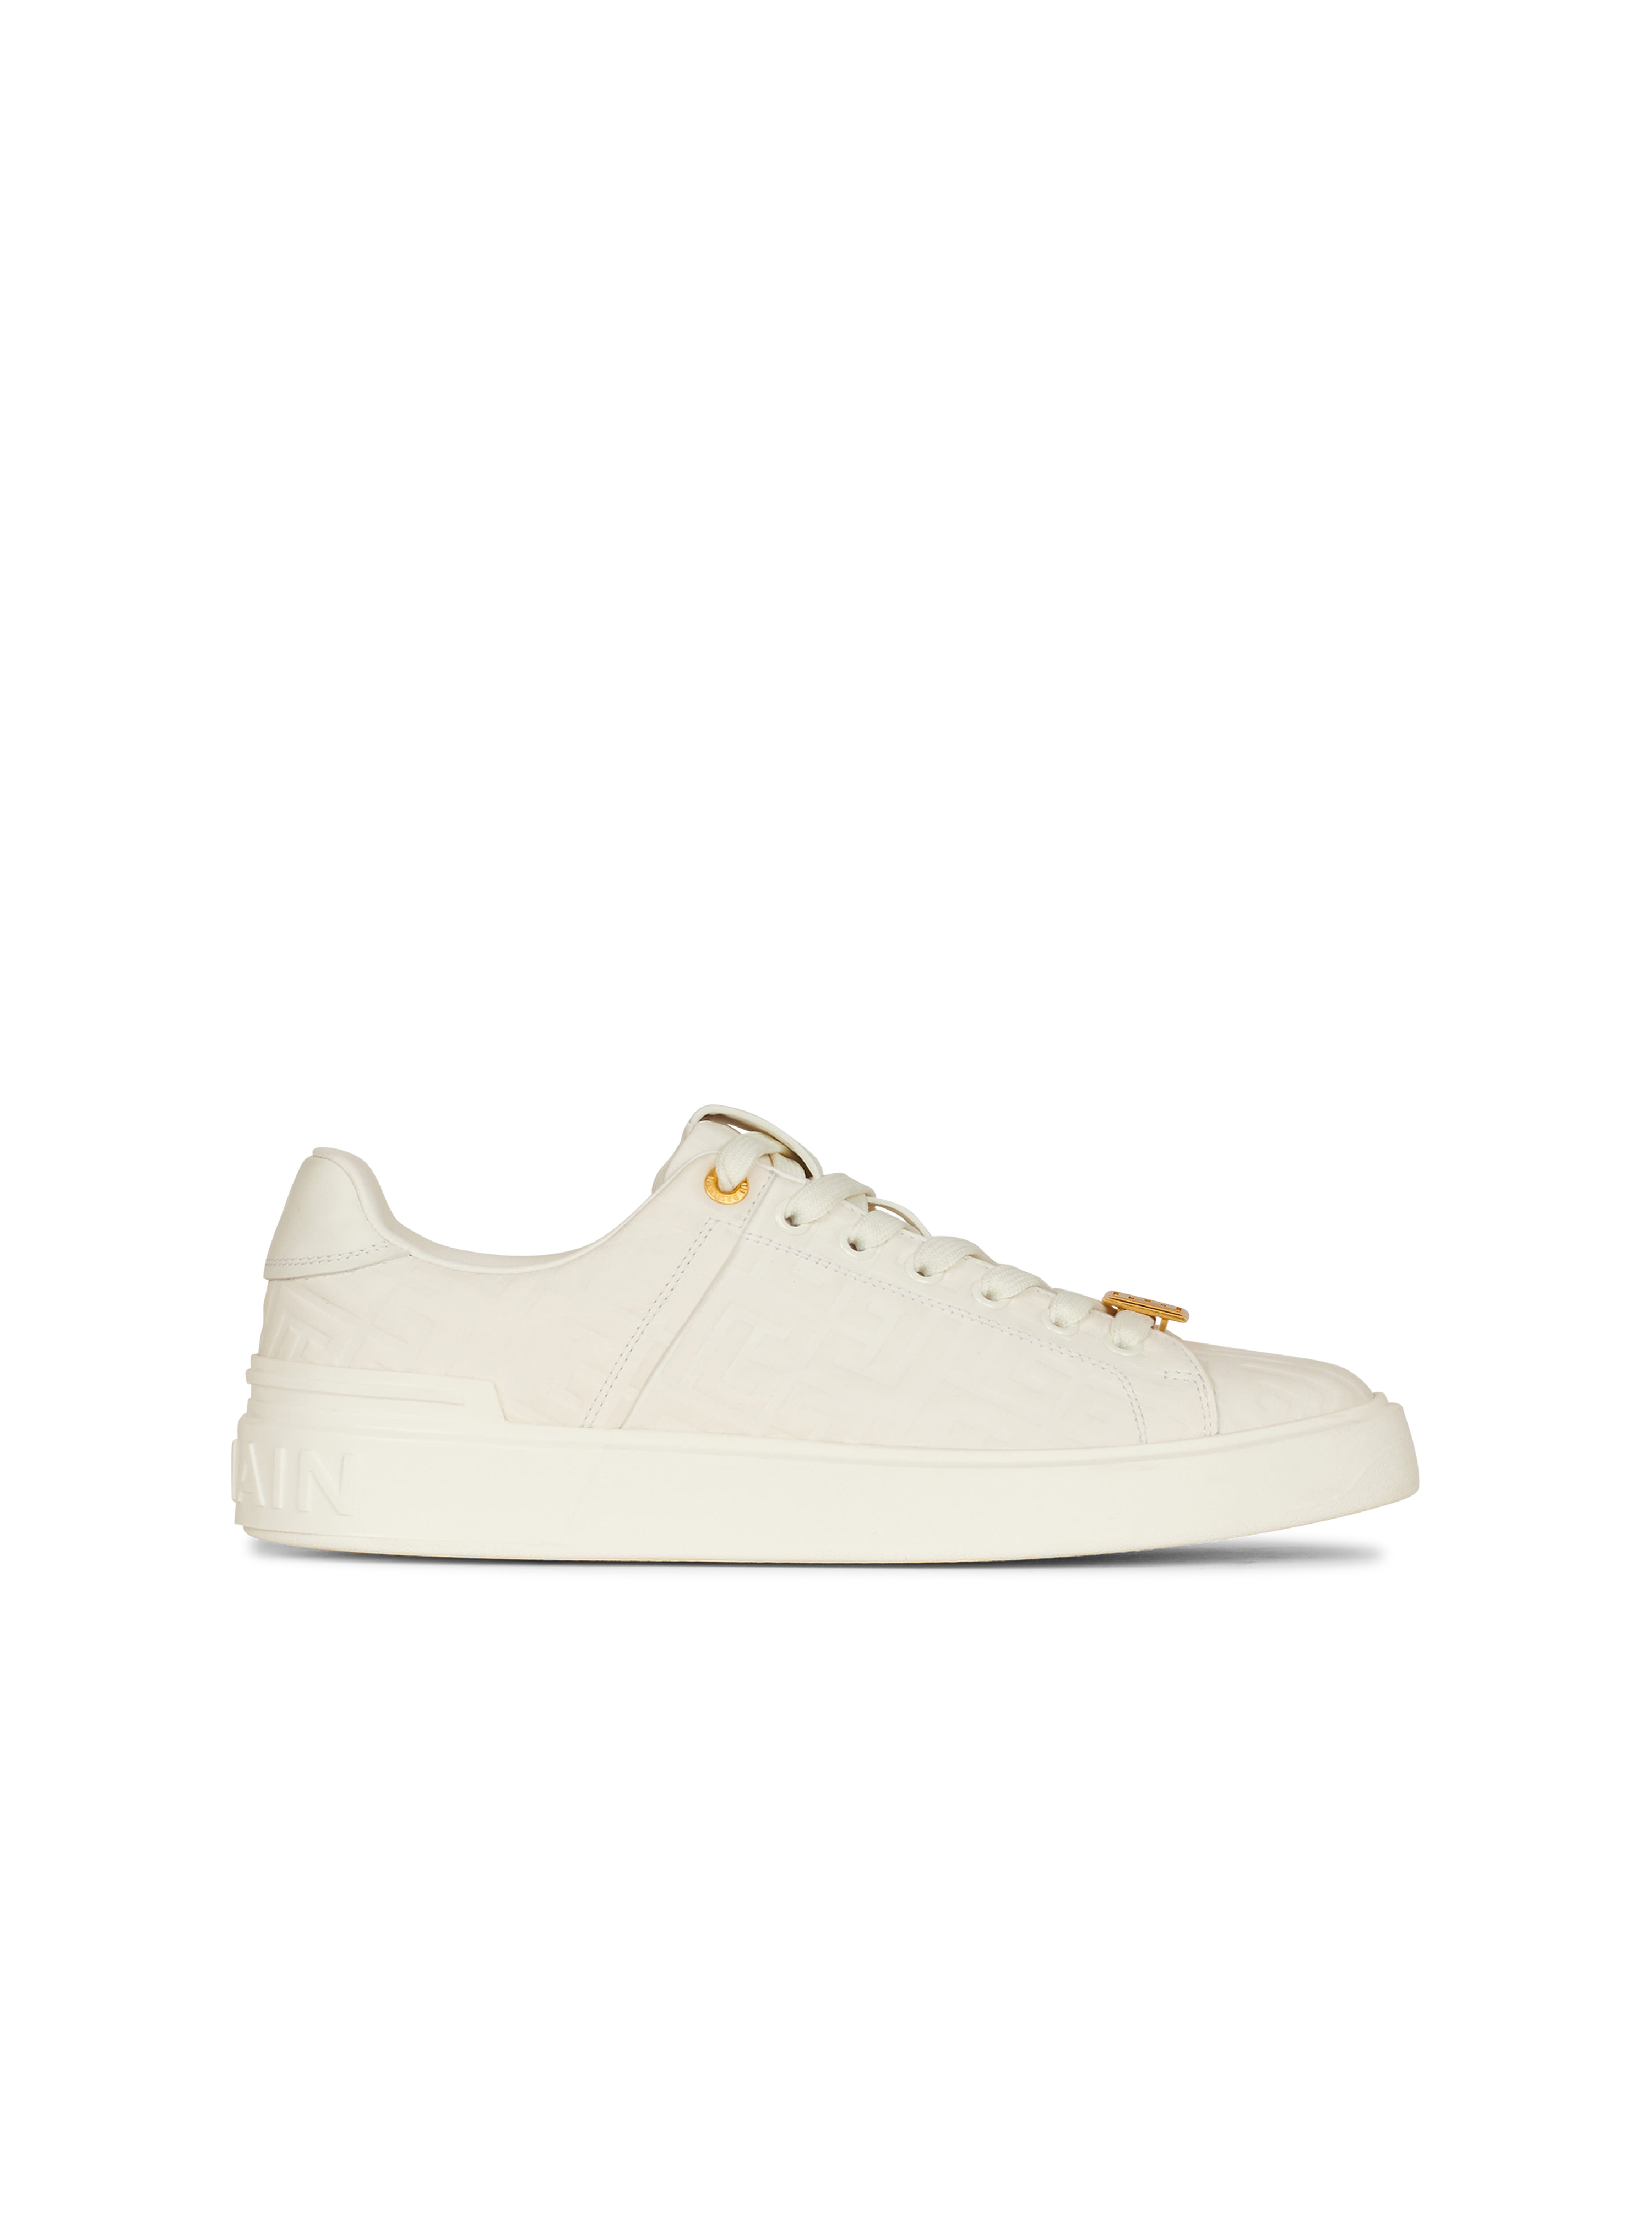 B-Court sneakers with embossed monogram, white